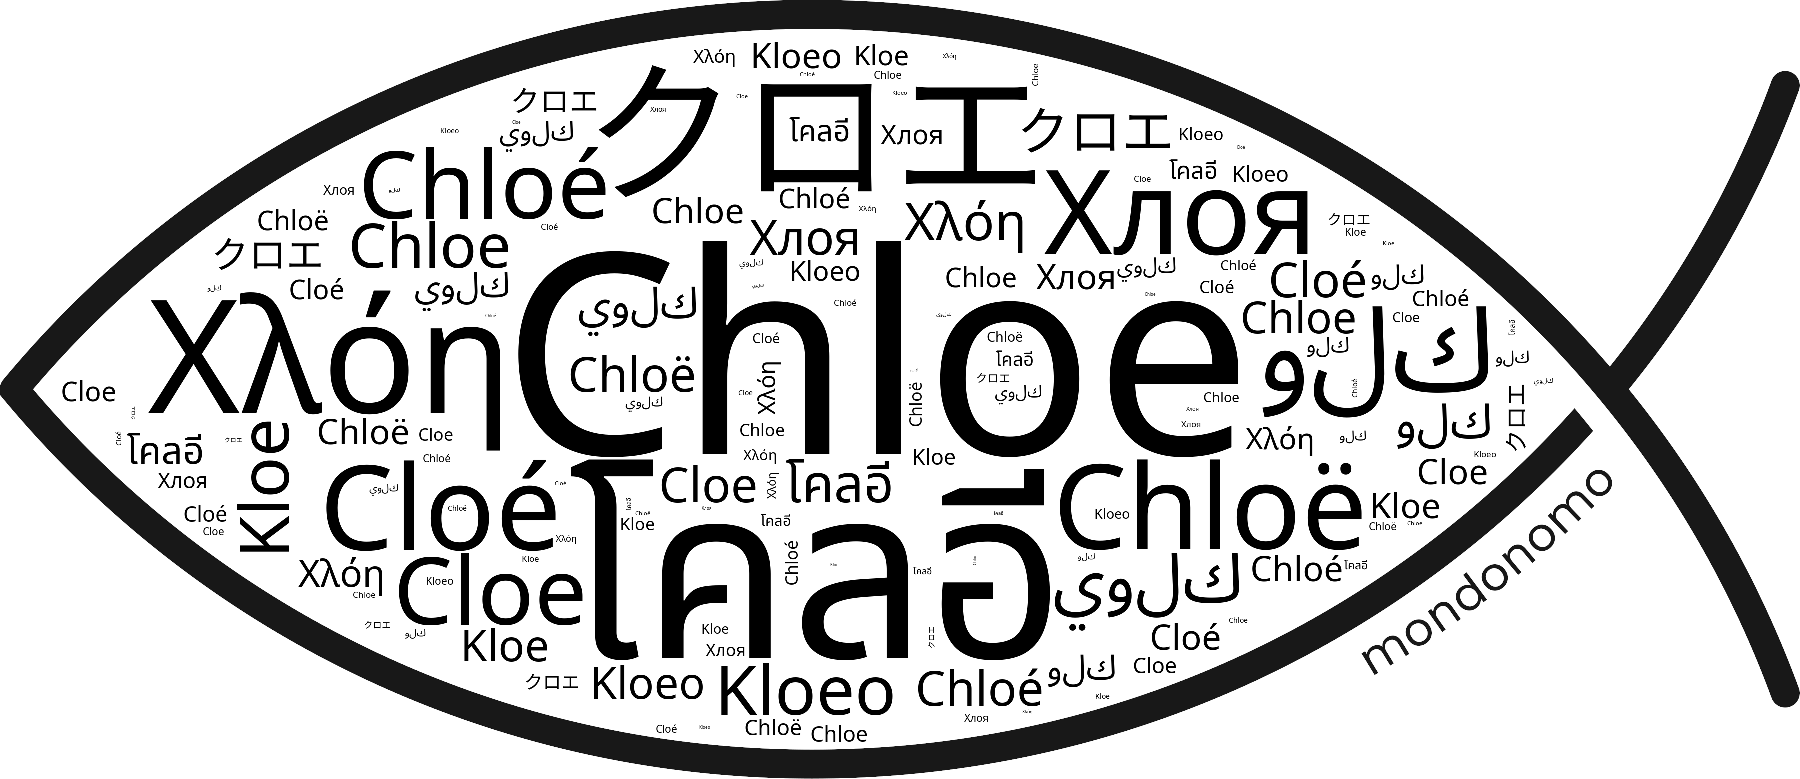 Name Chloe in the world's Bibles